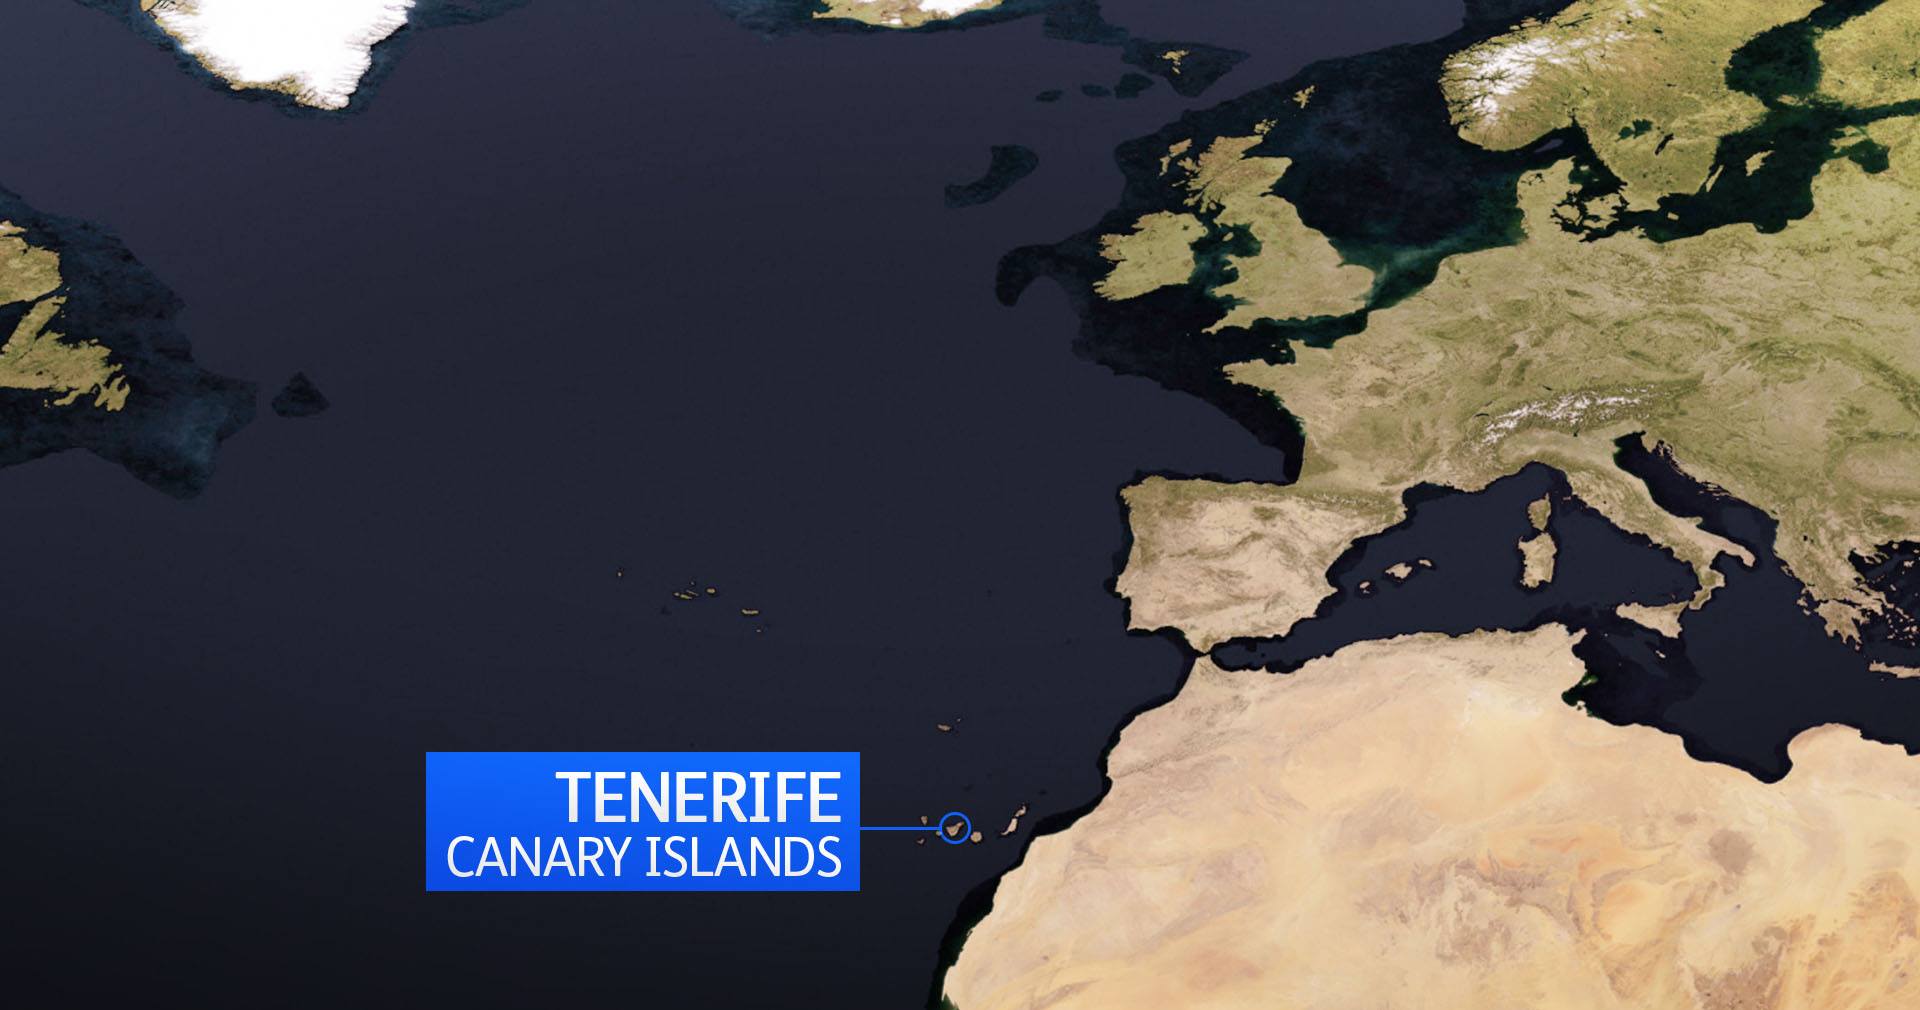  Hundreds of thousands of Scots visit Tenerife every year.